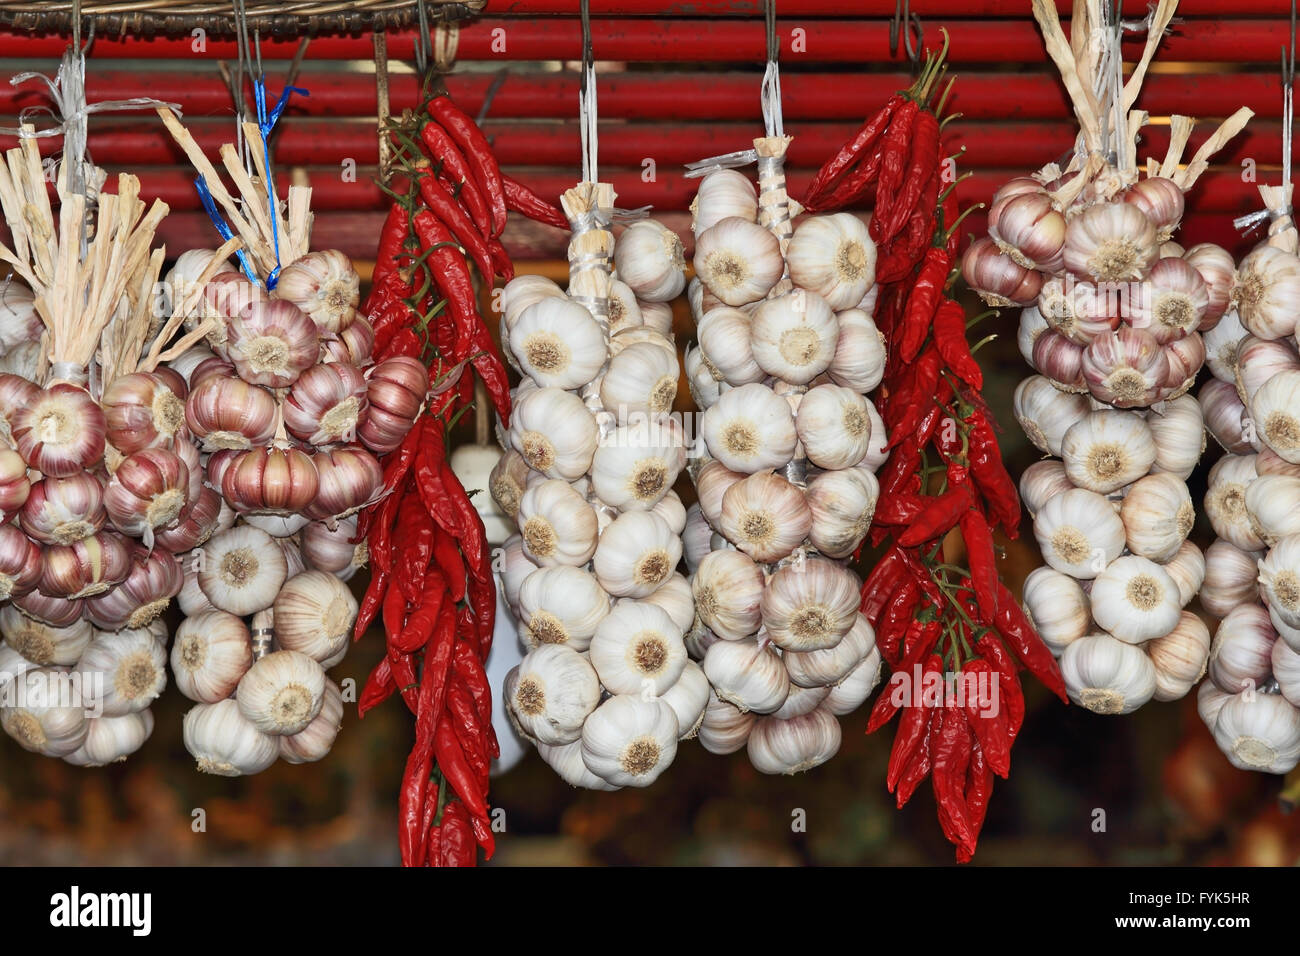 Bundles of garlic and bundles of cayenne pepper Stock Photo